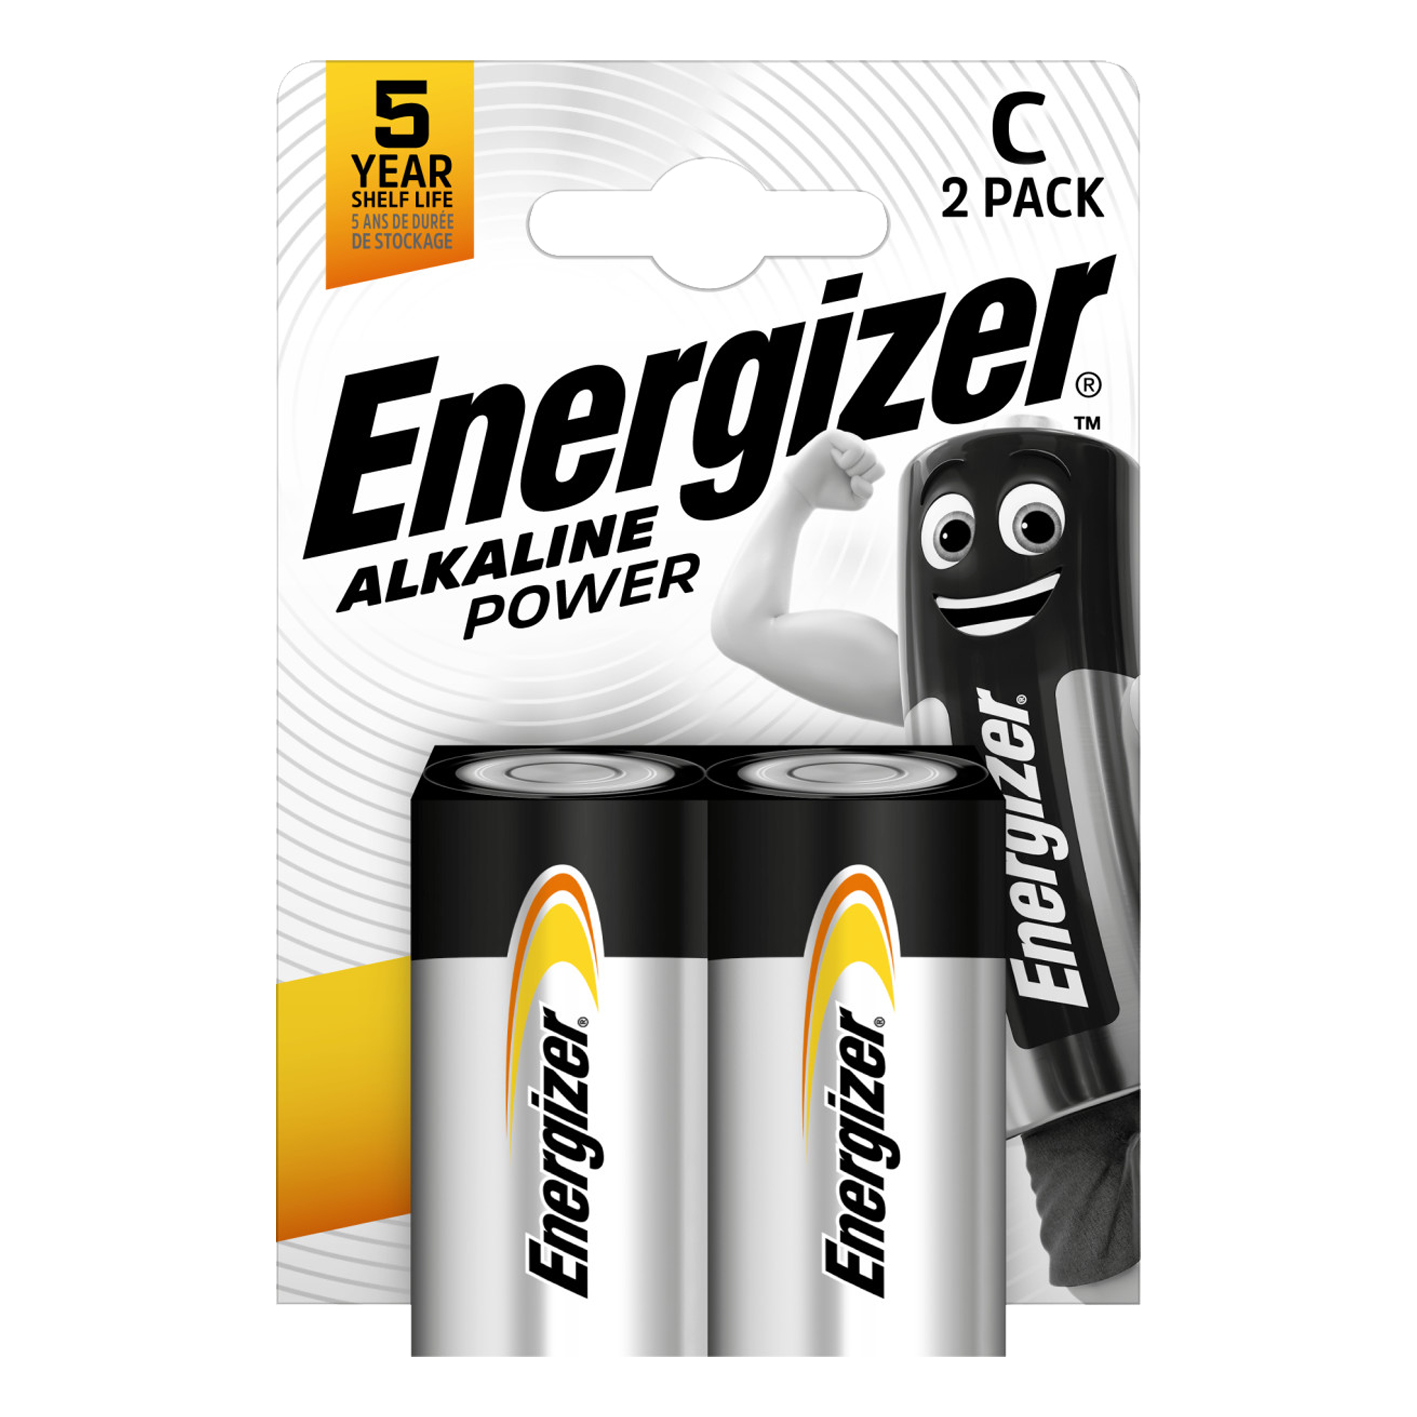 Energizer C Size Alkaline Power, Pack of 2